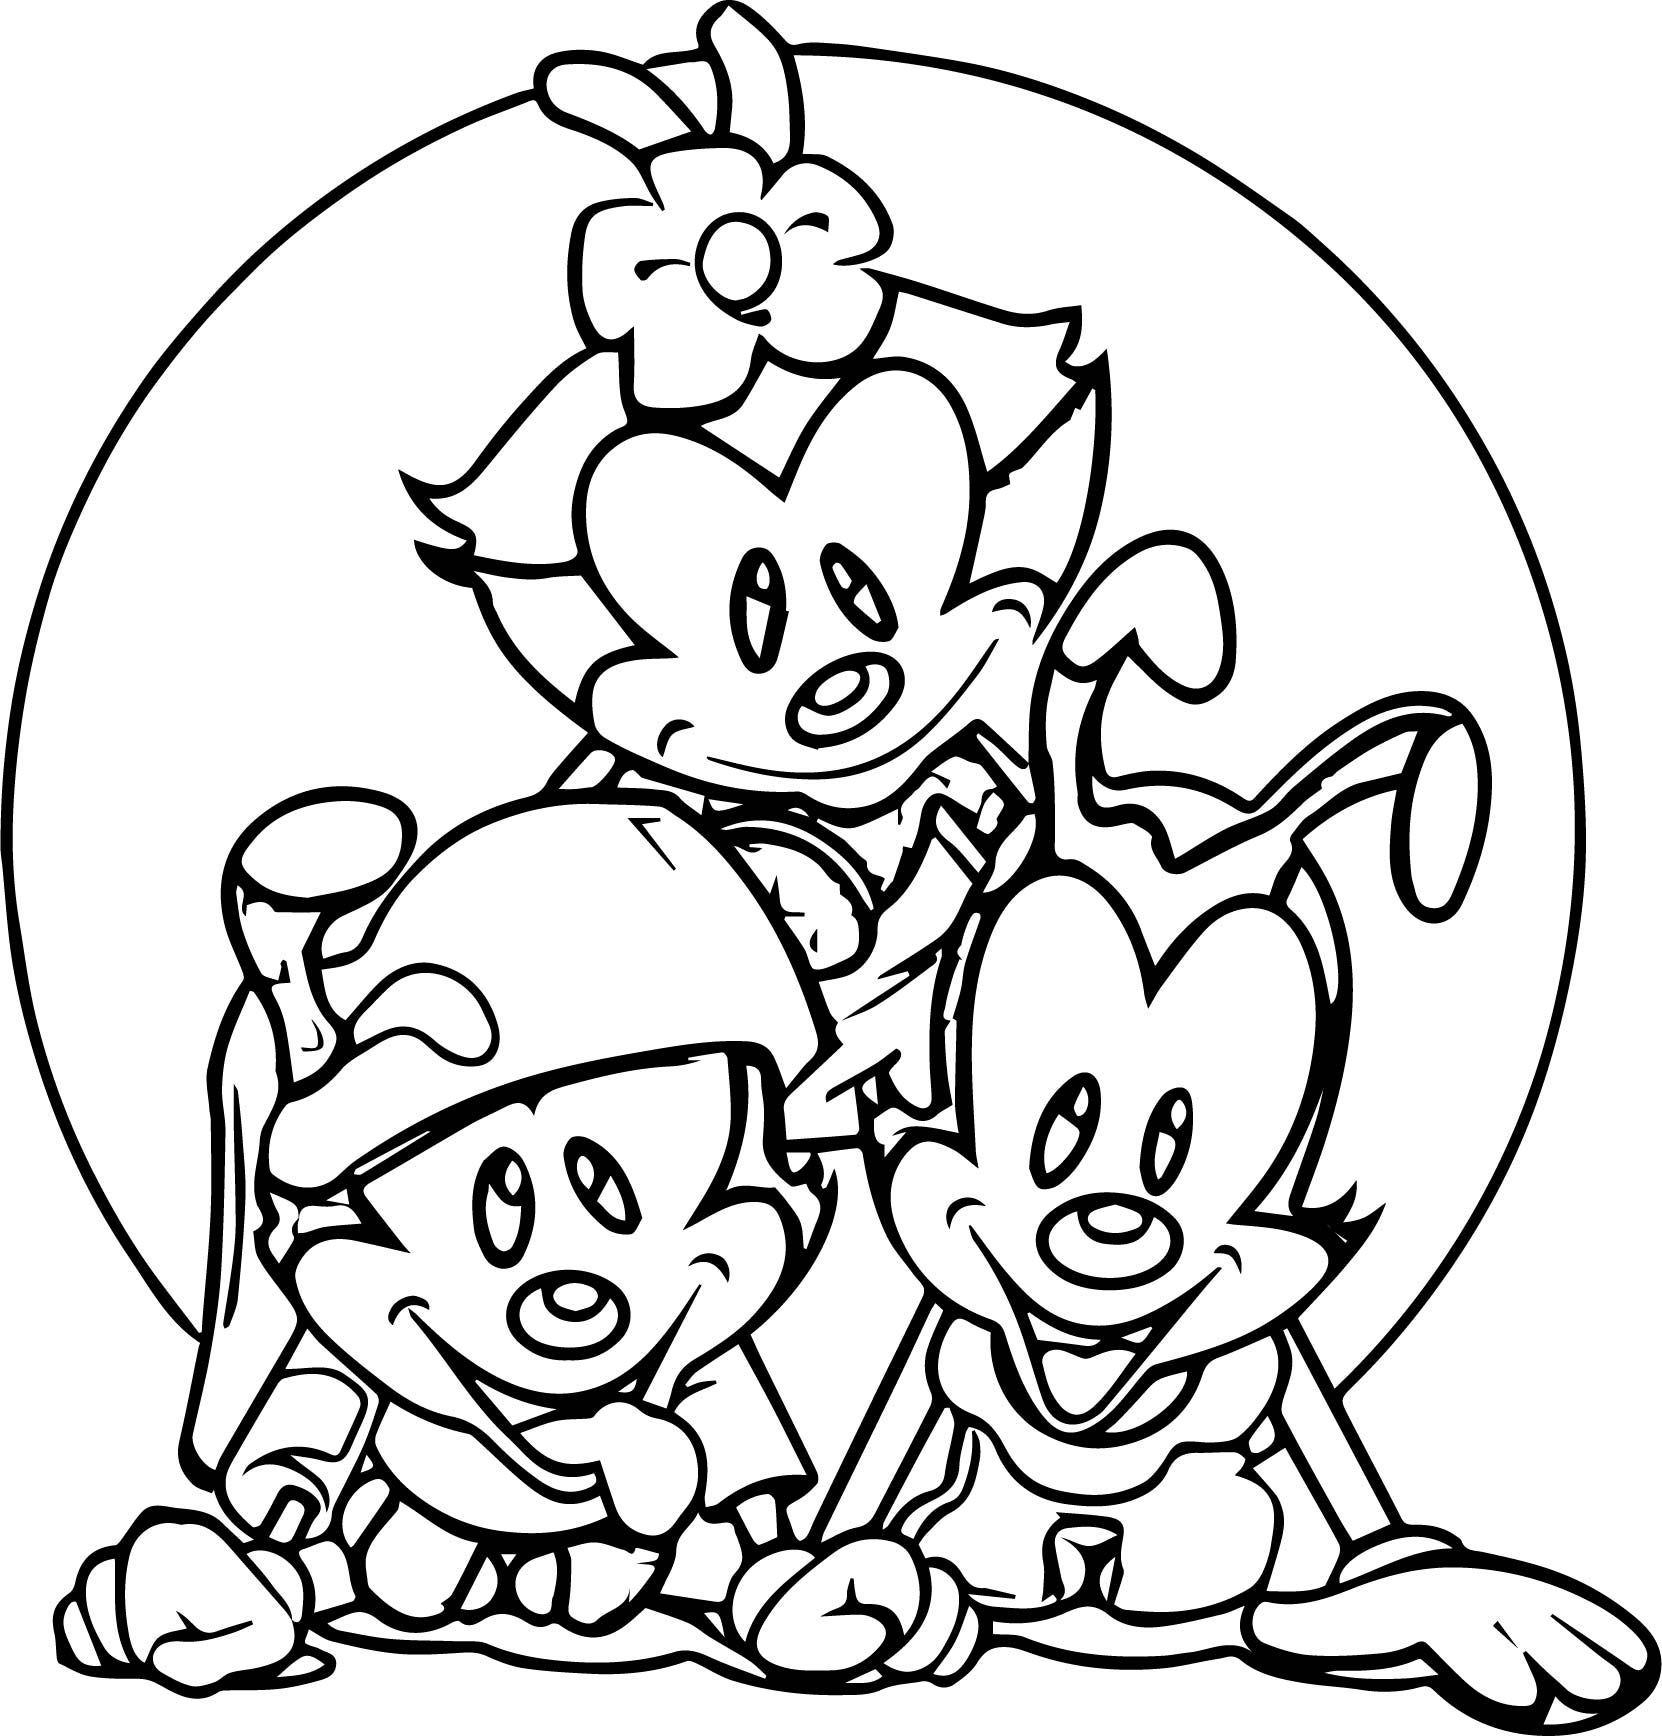 Printable Animaniacs Coloring Pages Pdf For Kids - Free Printable Animaniacs Coloring Pages